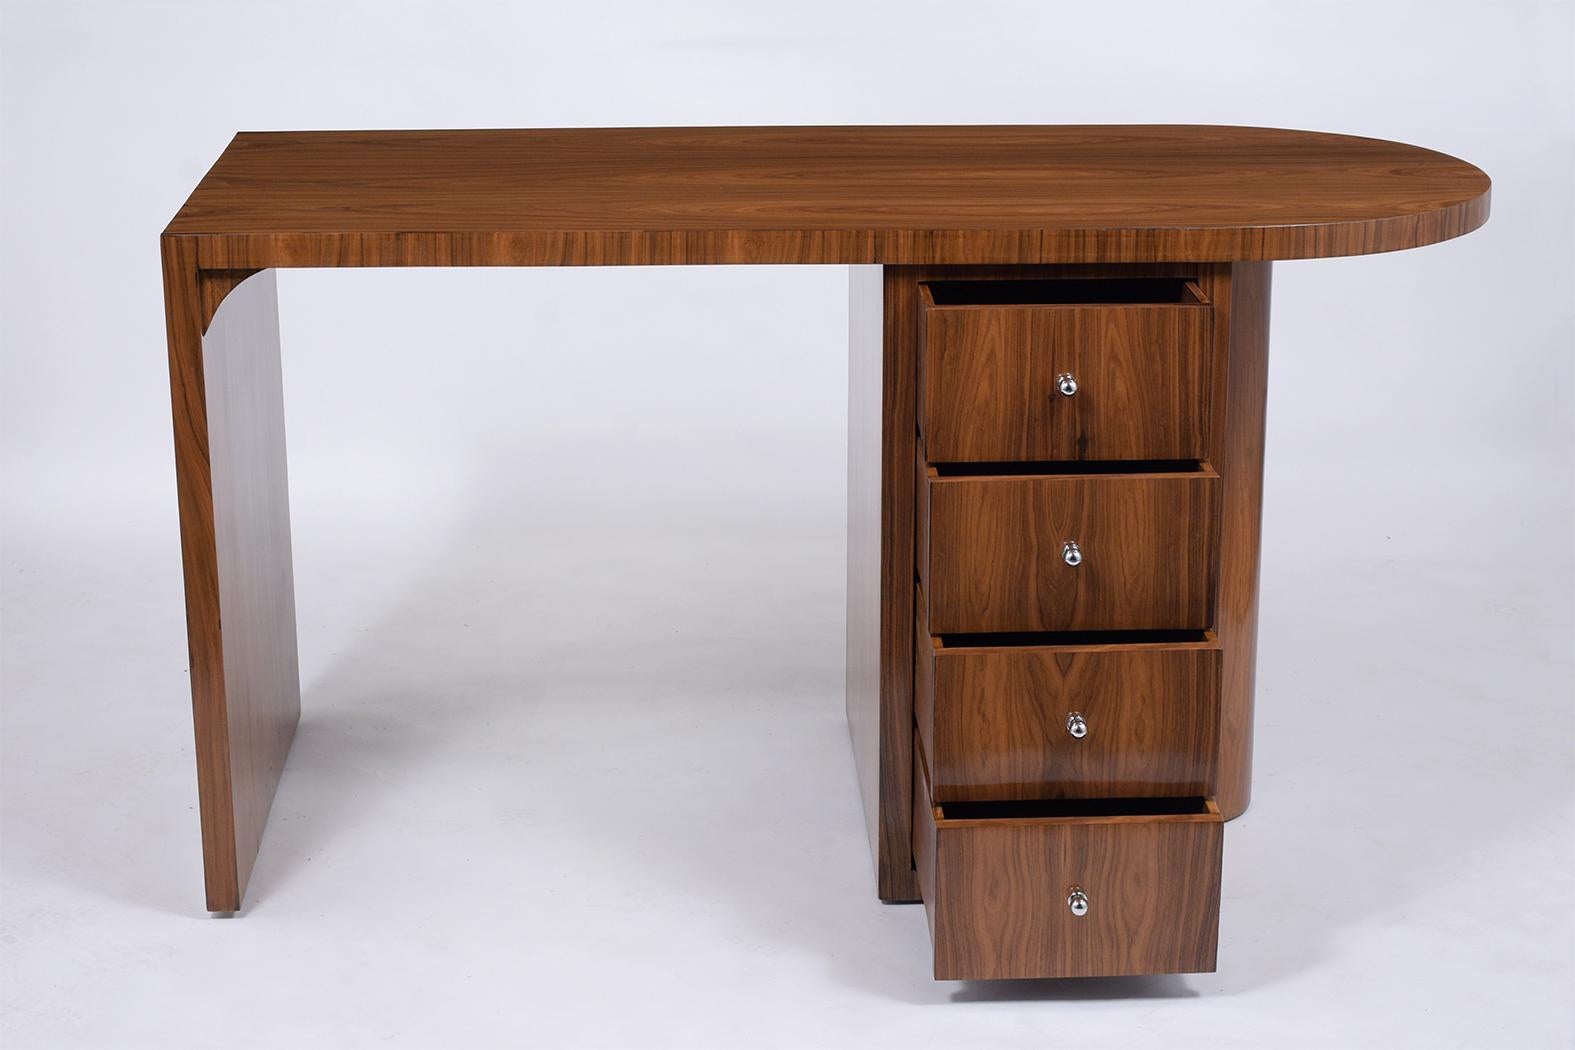 An extraordinary vintage Art Deco desk finely crafted out of exotic kingwood with a newly lacquered finish and is fully restored. This writing table is eye-catching features an L design with a stylish oval top, and a pedestal cabinet that comes with